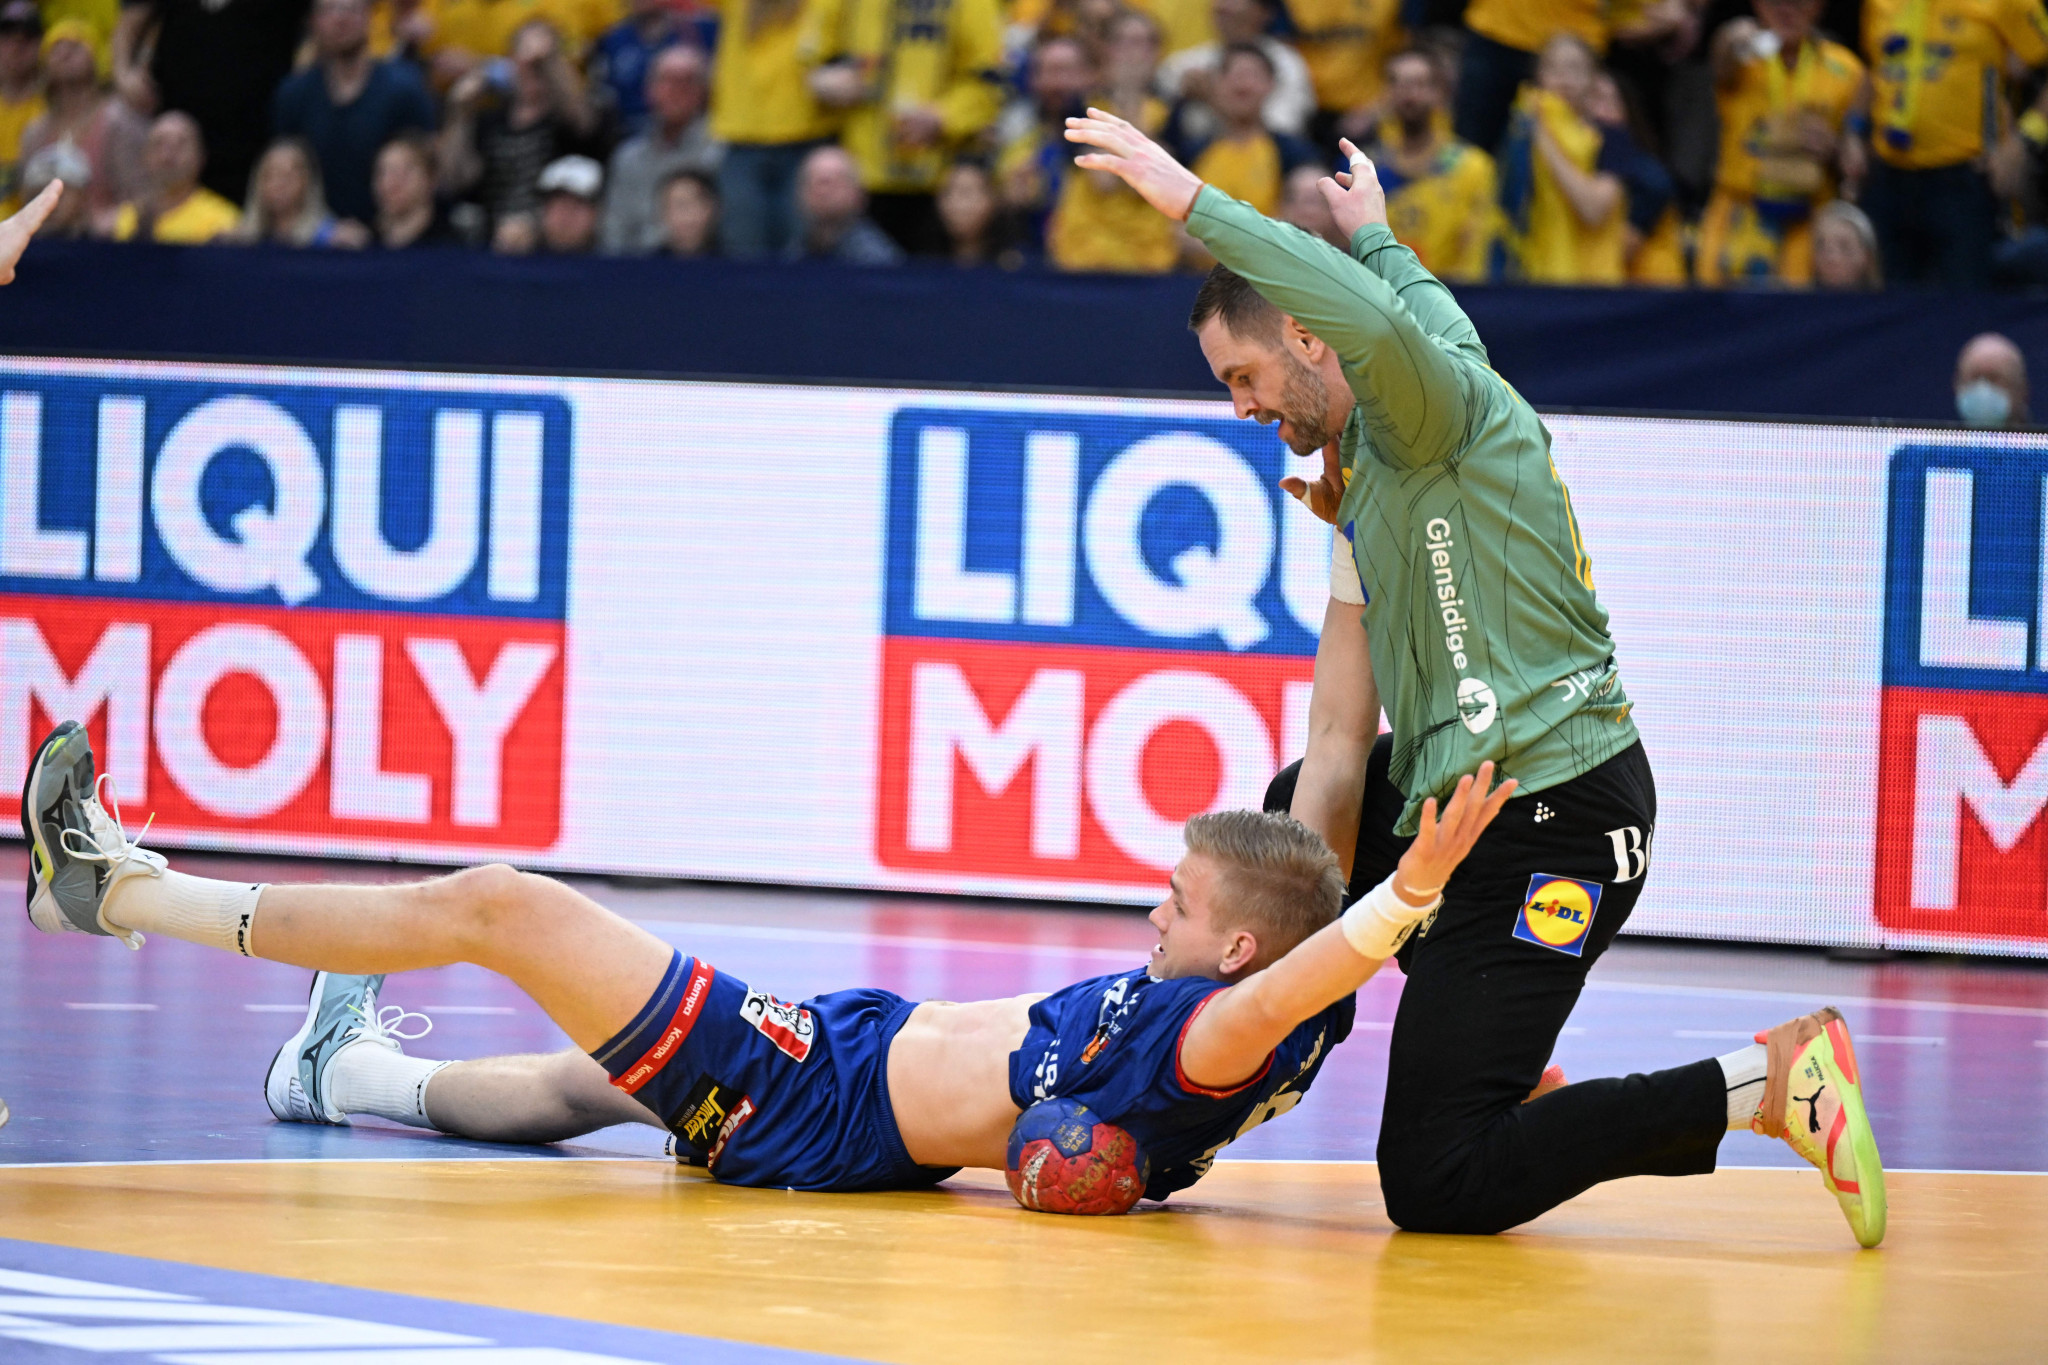 Andreas Palicka, right, the replacement goalkeeper for co-hosts Sweden, produced an impressive performance to book his nation a place in the Men's Handball World Championship quarter-finals ©Getty Images